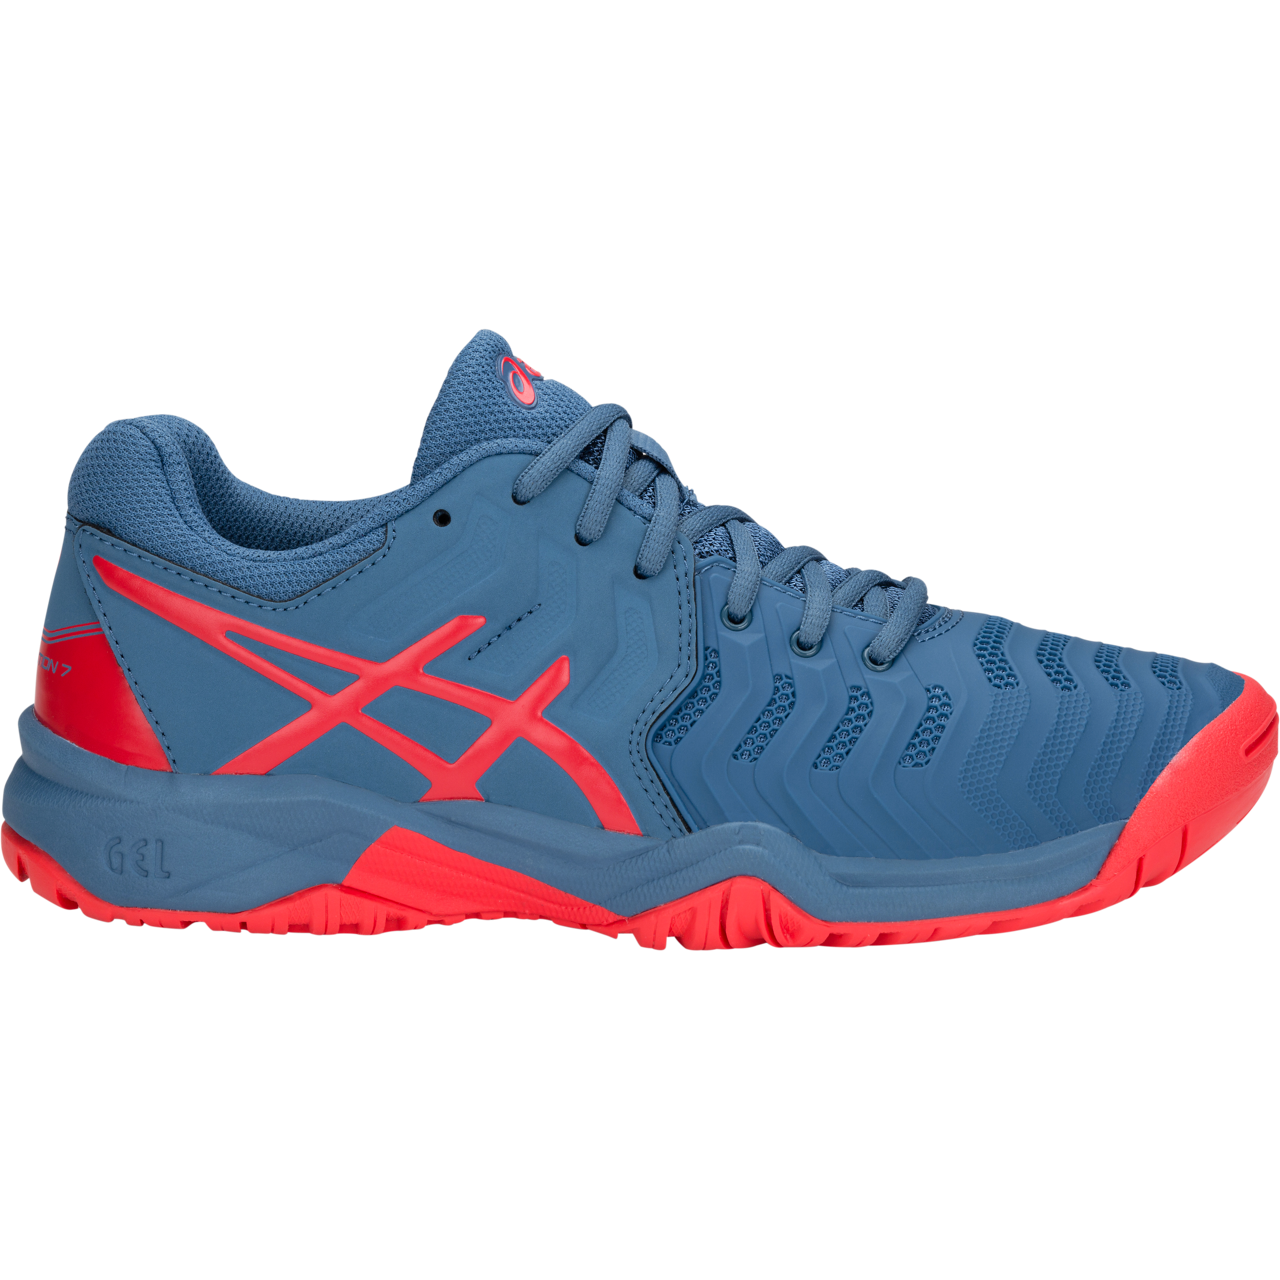 asics youth tennis shoes cheap online